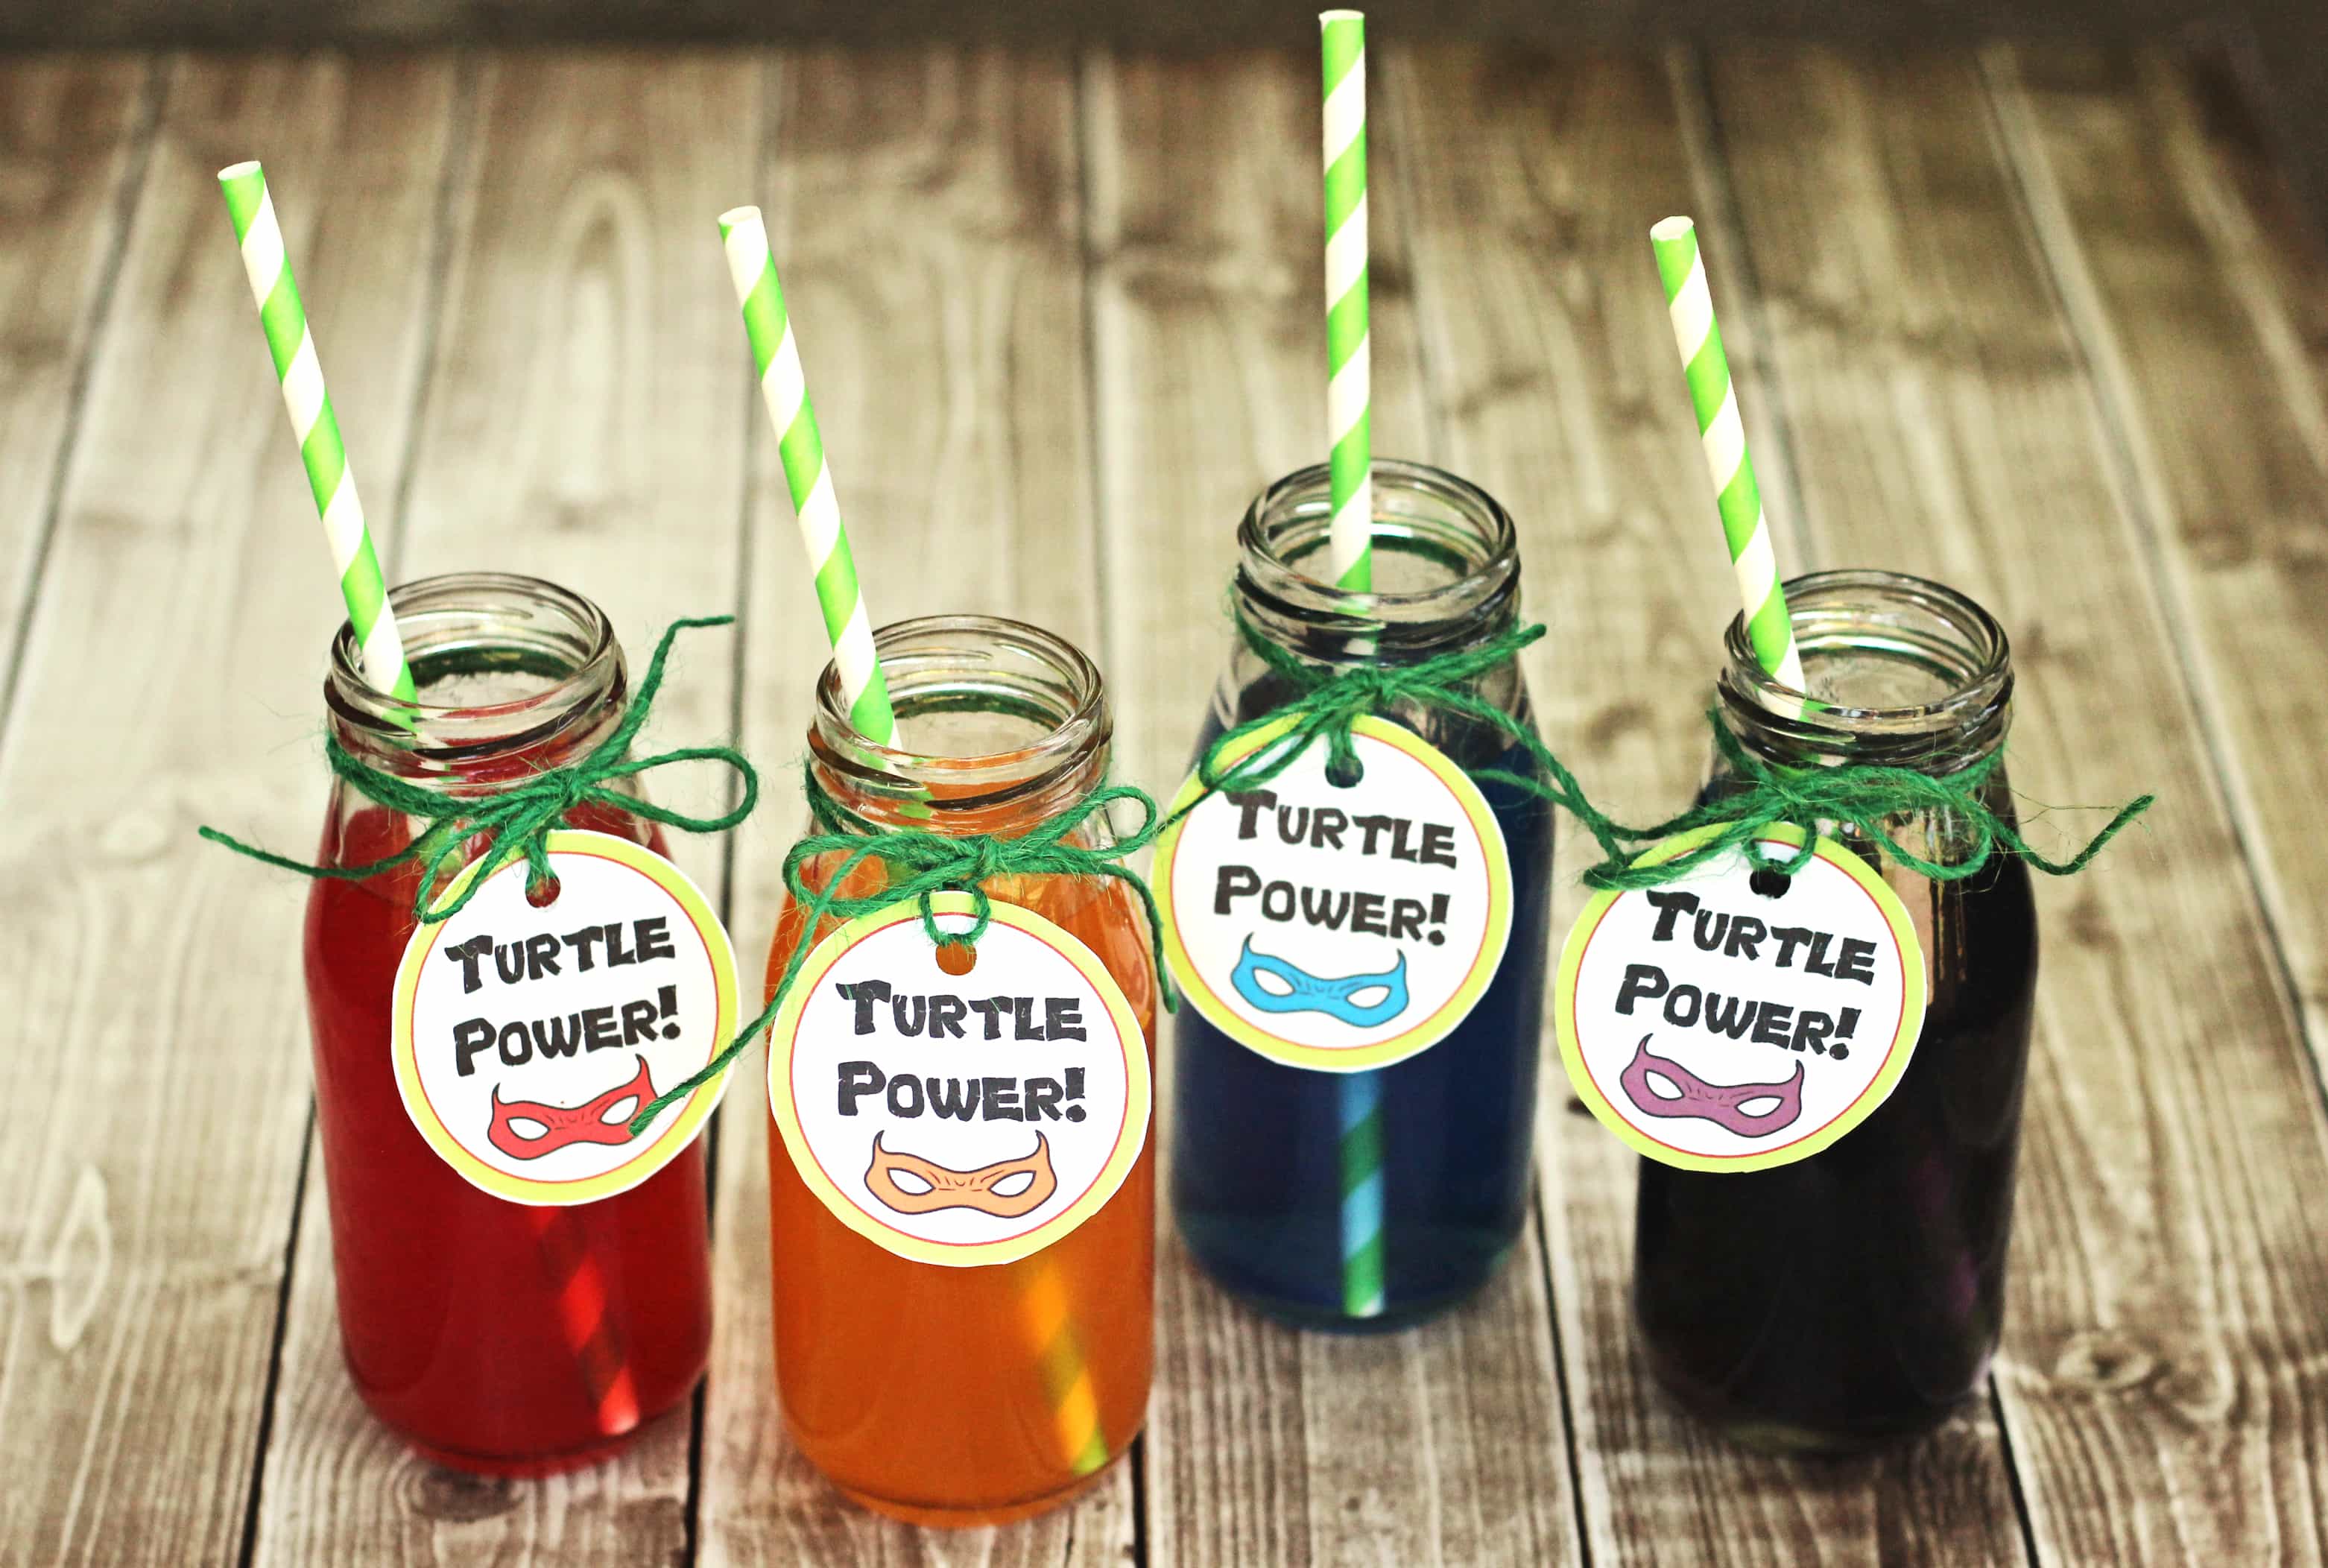 Use these TMNT party ideas and free TMNT printables to throw an epic birthday party or playdate! You can't beat FREE TMNT party free printables